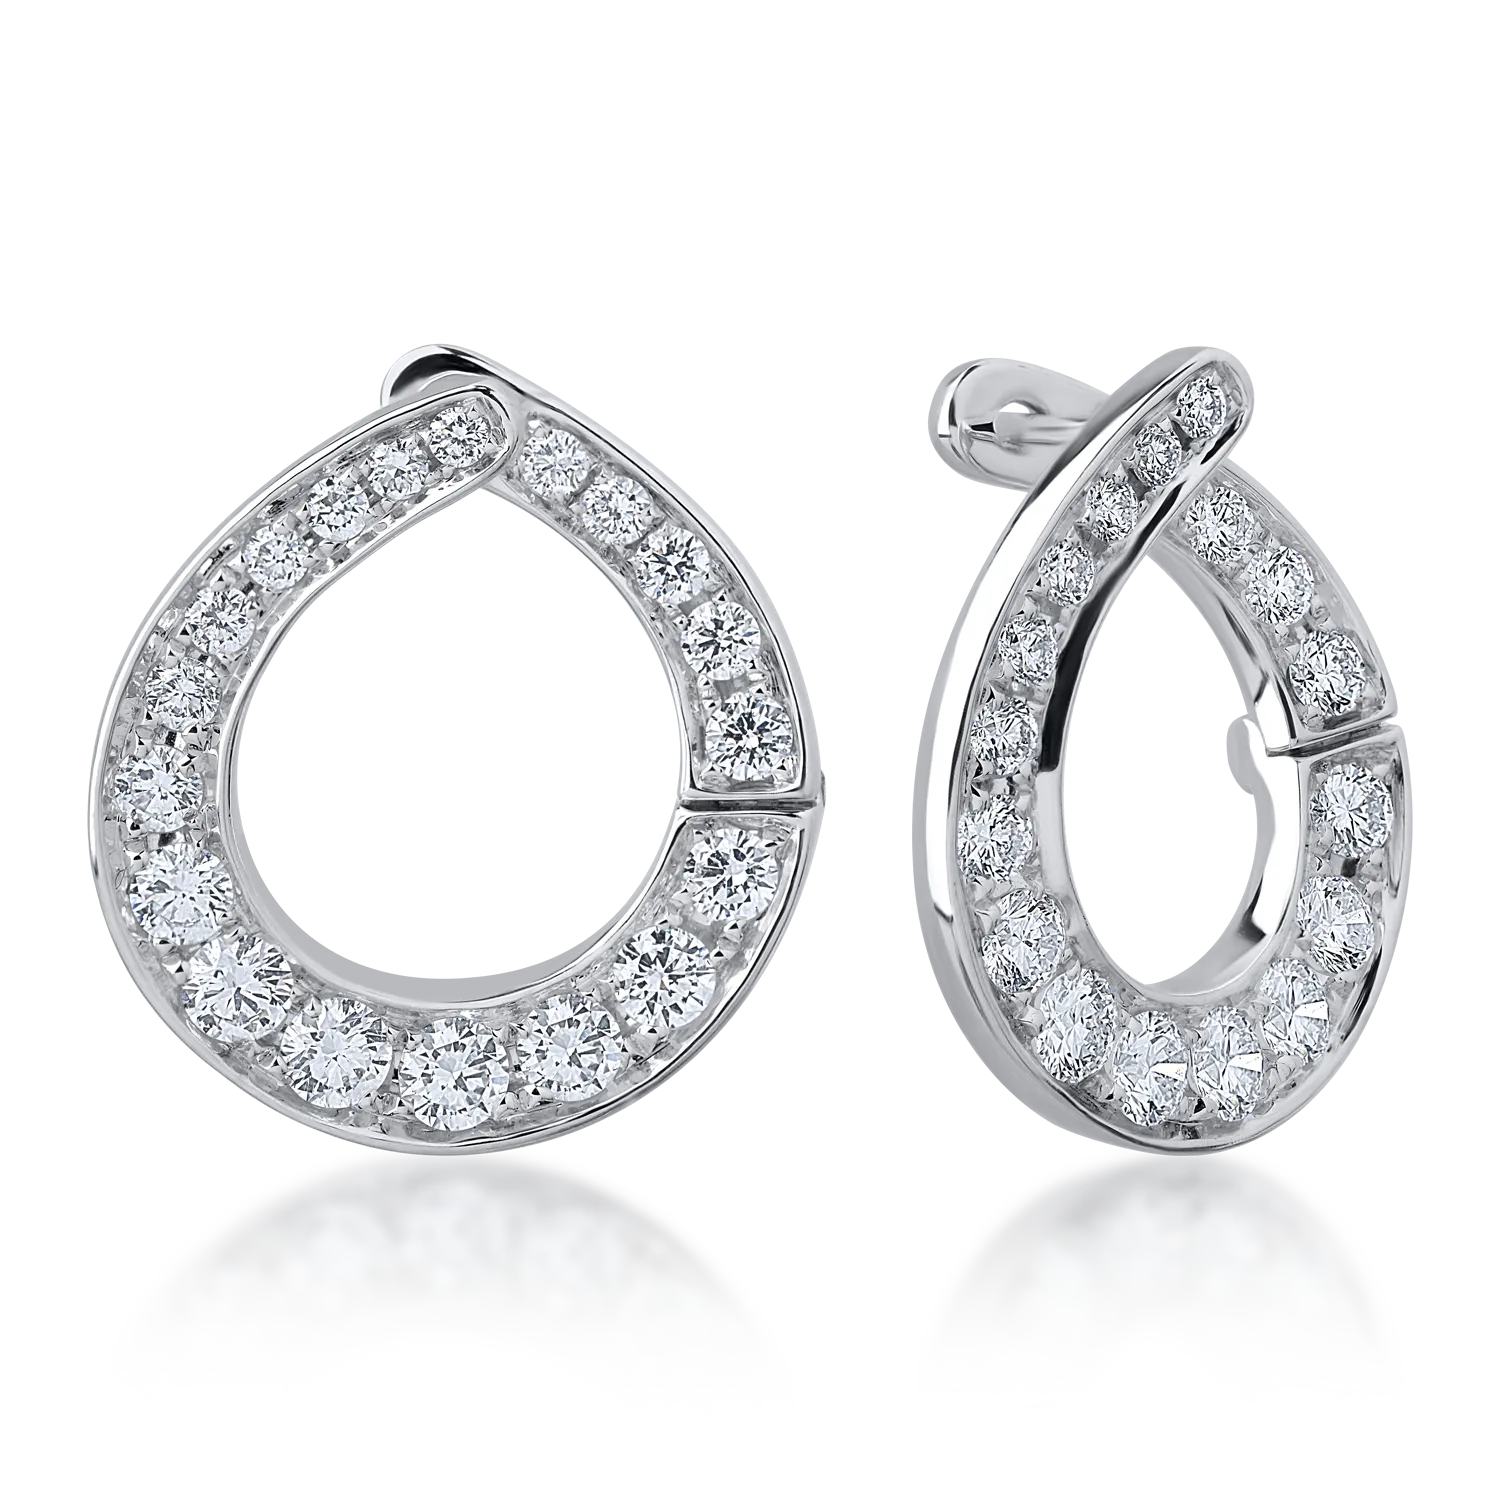 White gold earrings with 1.551ct diamonds